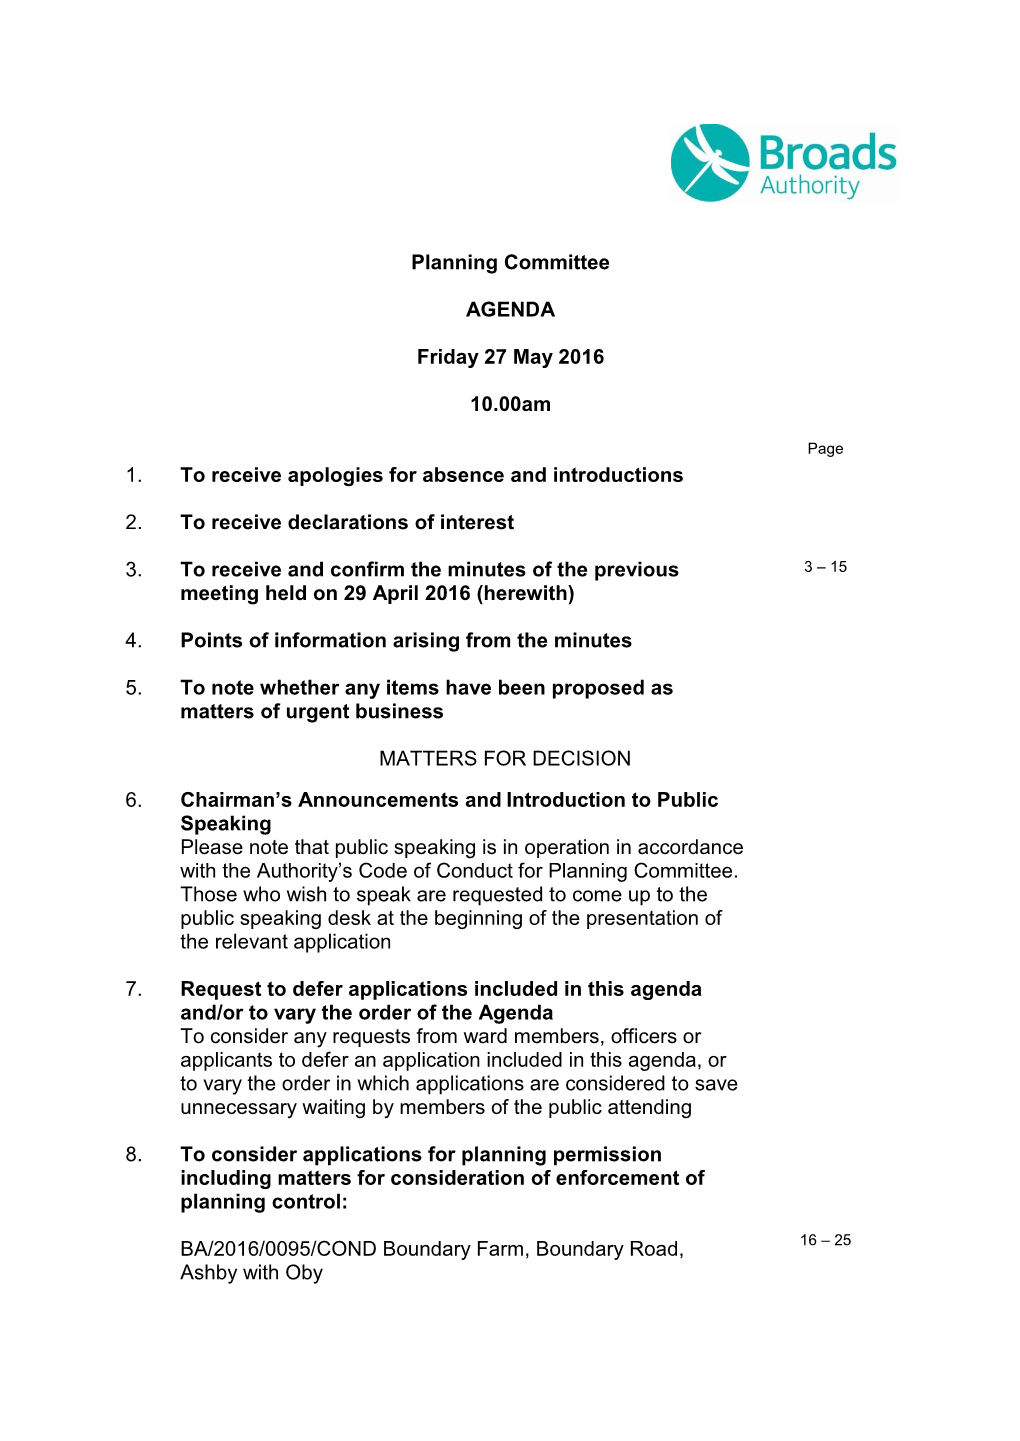 Planning Committee AGENDA Friday 27 May 2016 10.00Am 1. to Receive